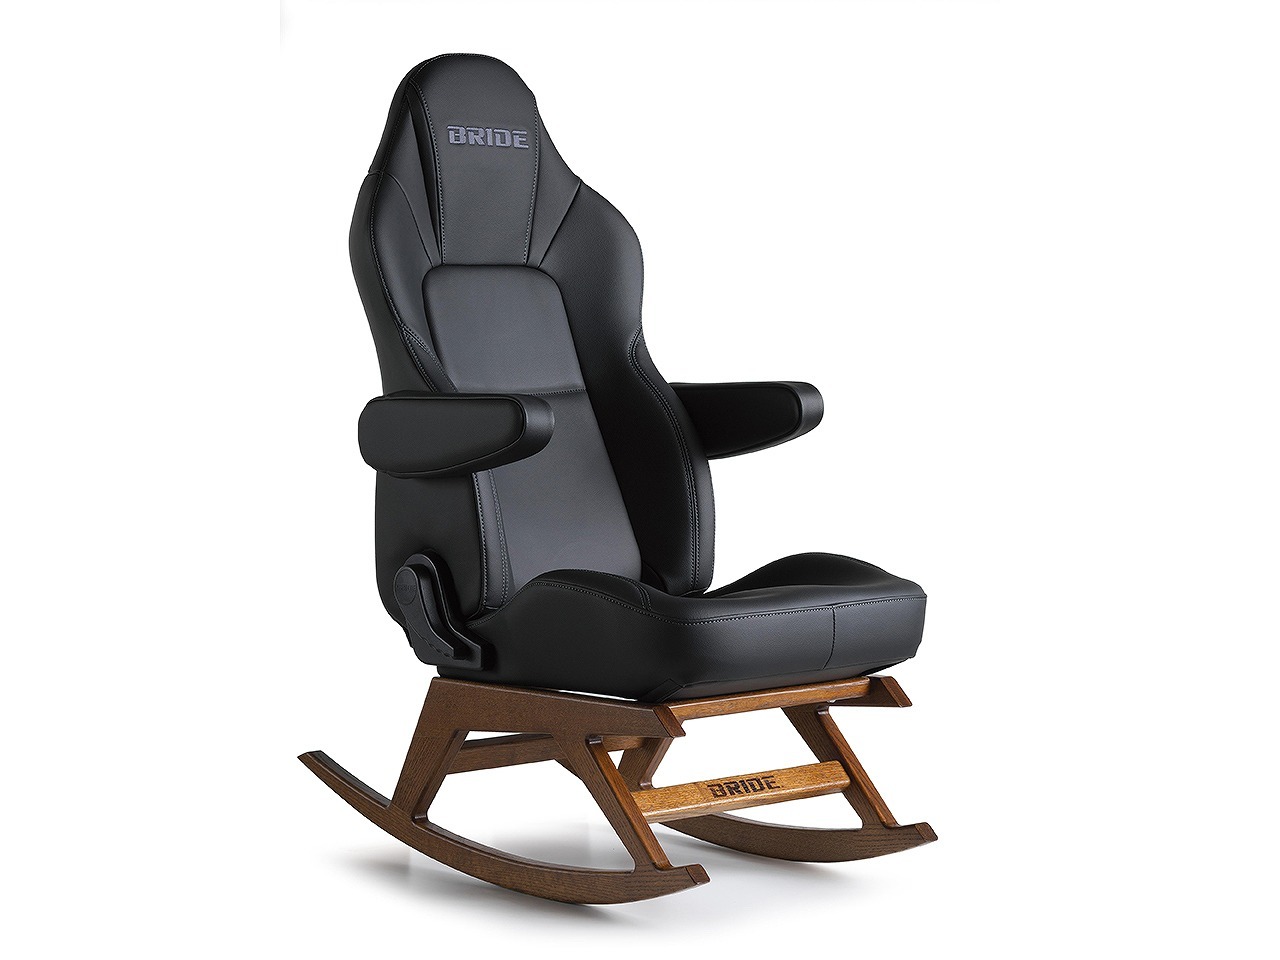 Let’s turn our Bride racing seats into rocking chairs, since we’re all